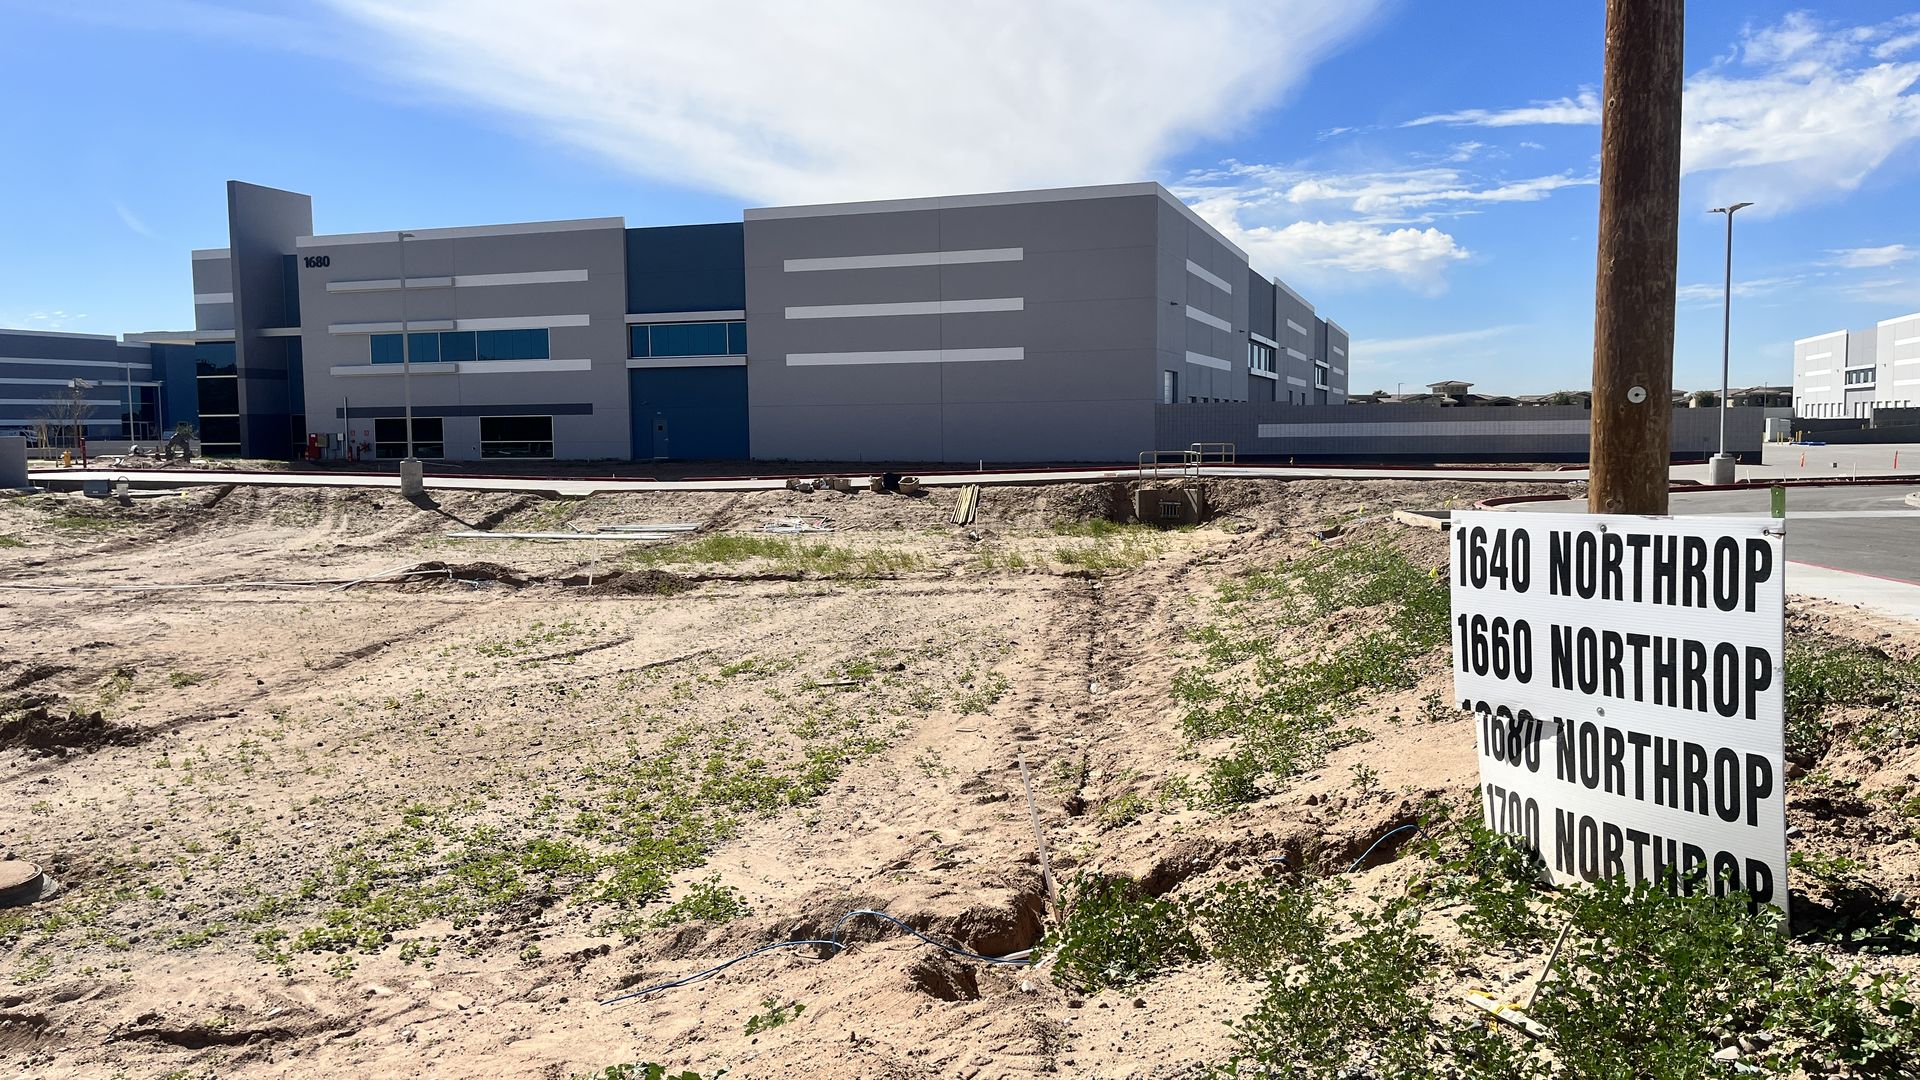 A new warehouse with a sign in the foreground with addresses.